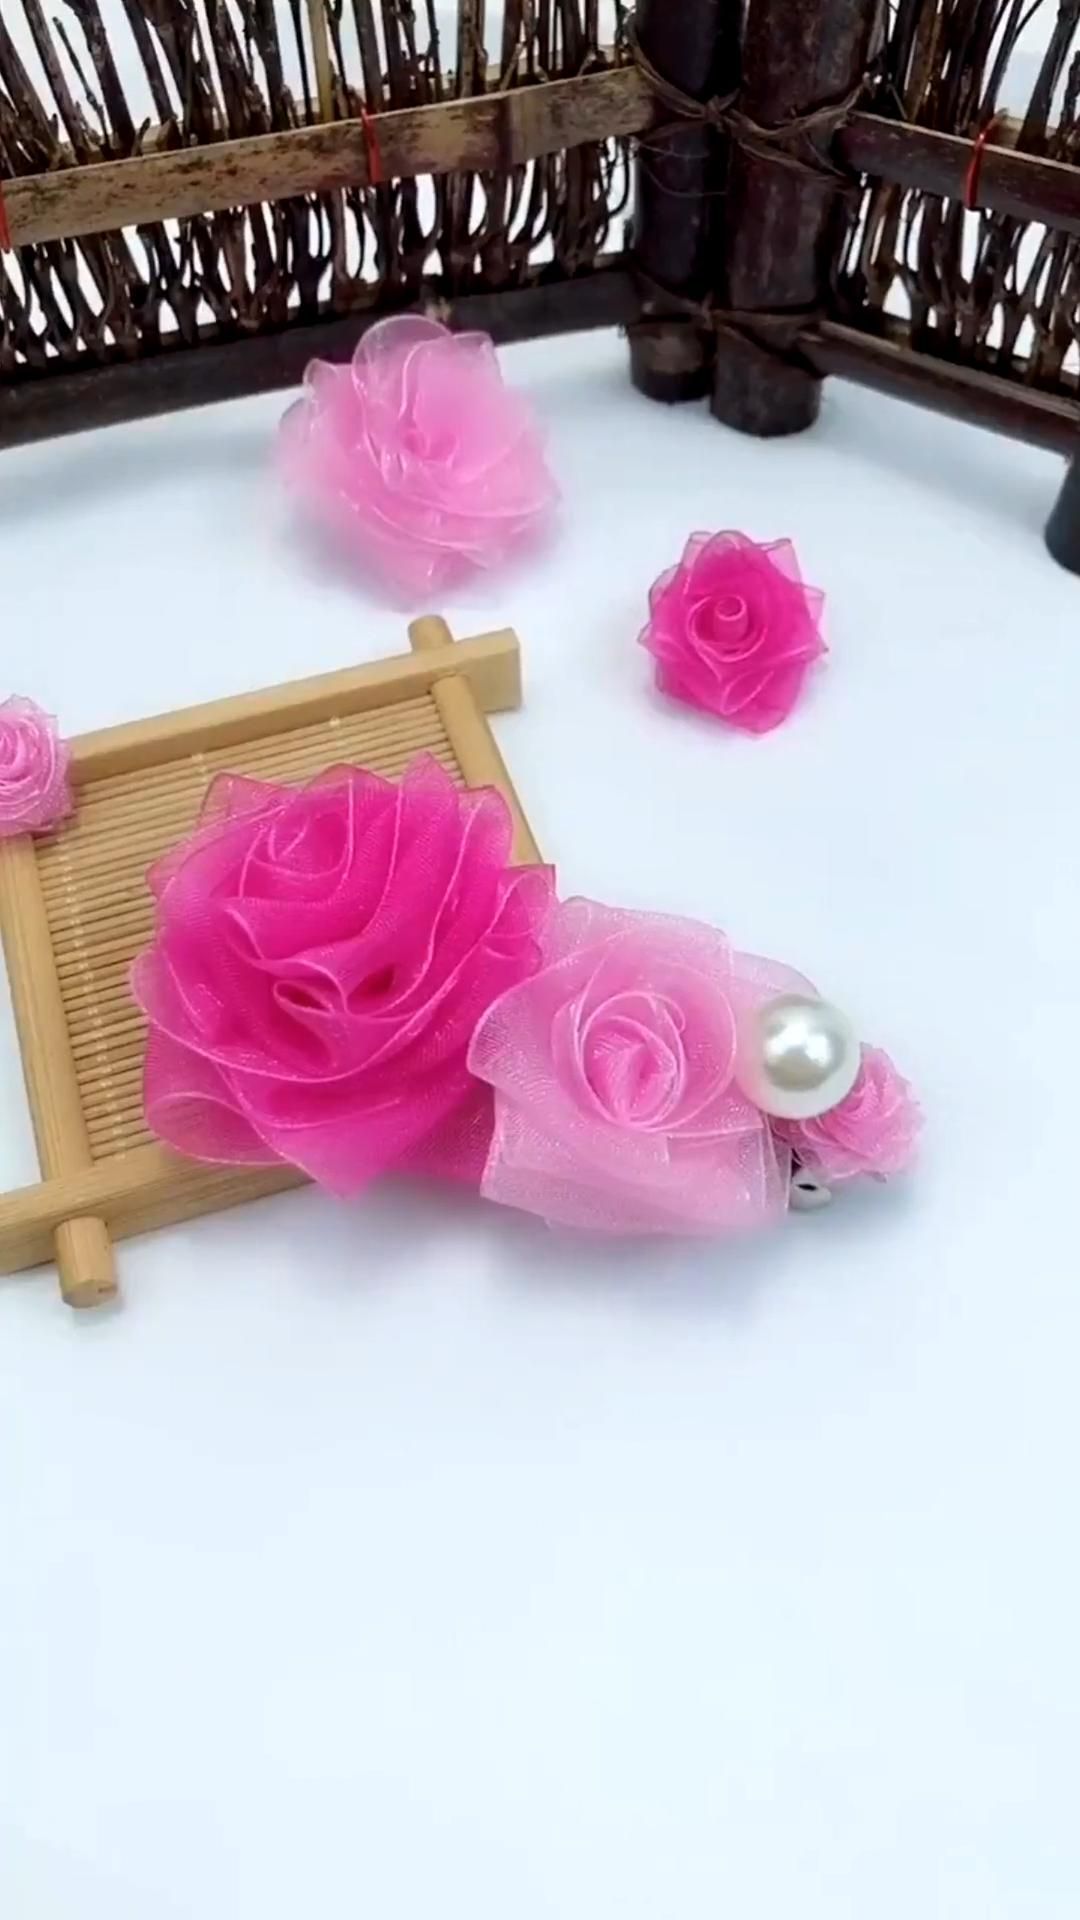 The Easy Way to Make Ribbon Flowers by Hand -   22 simple fabric crafts Videos ideas